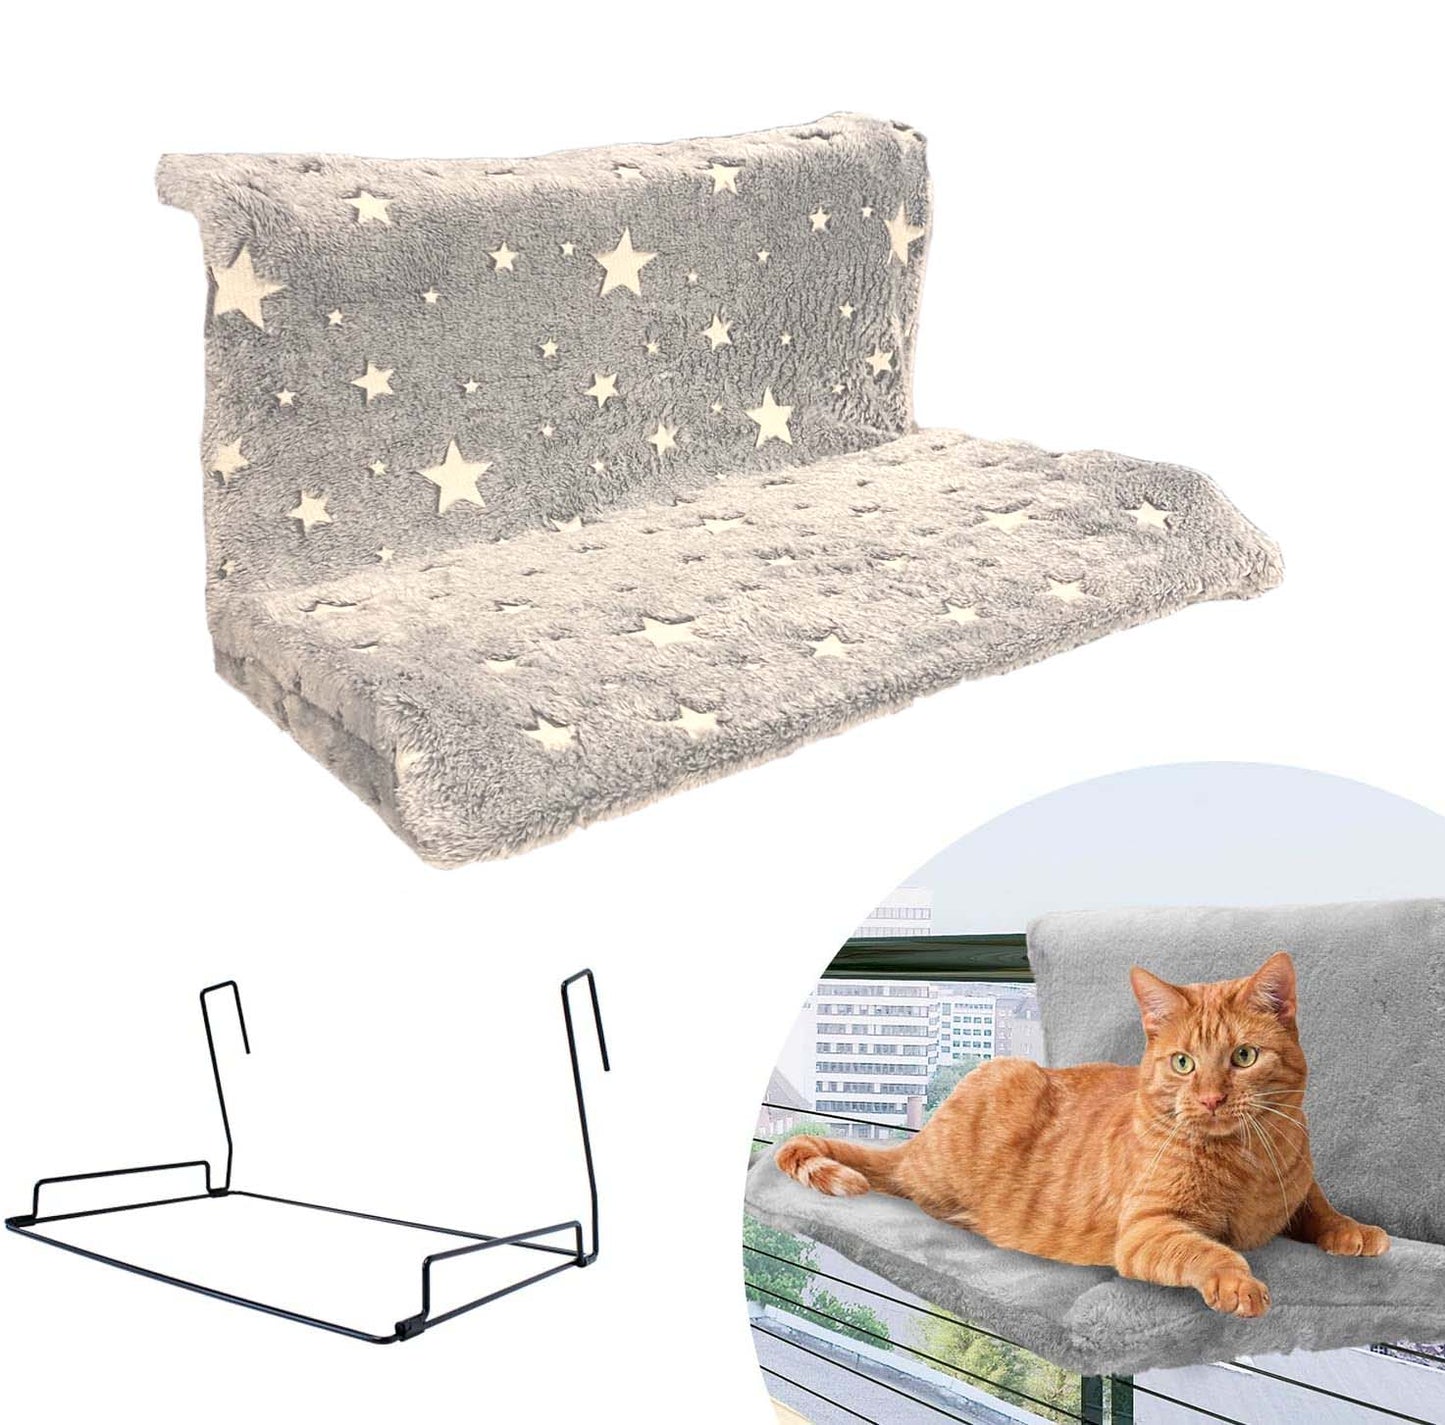 Hanging Bed for Cats with Adjustable Wire Frame - Multi-Color Options